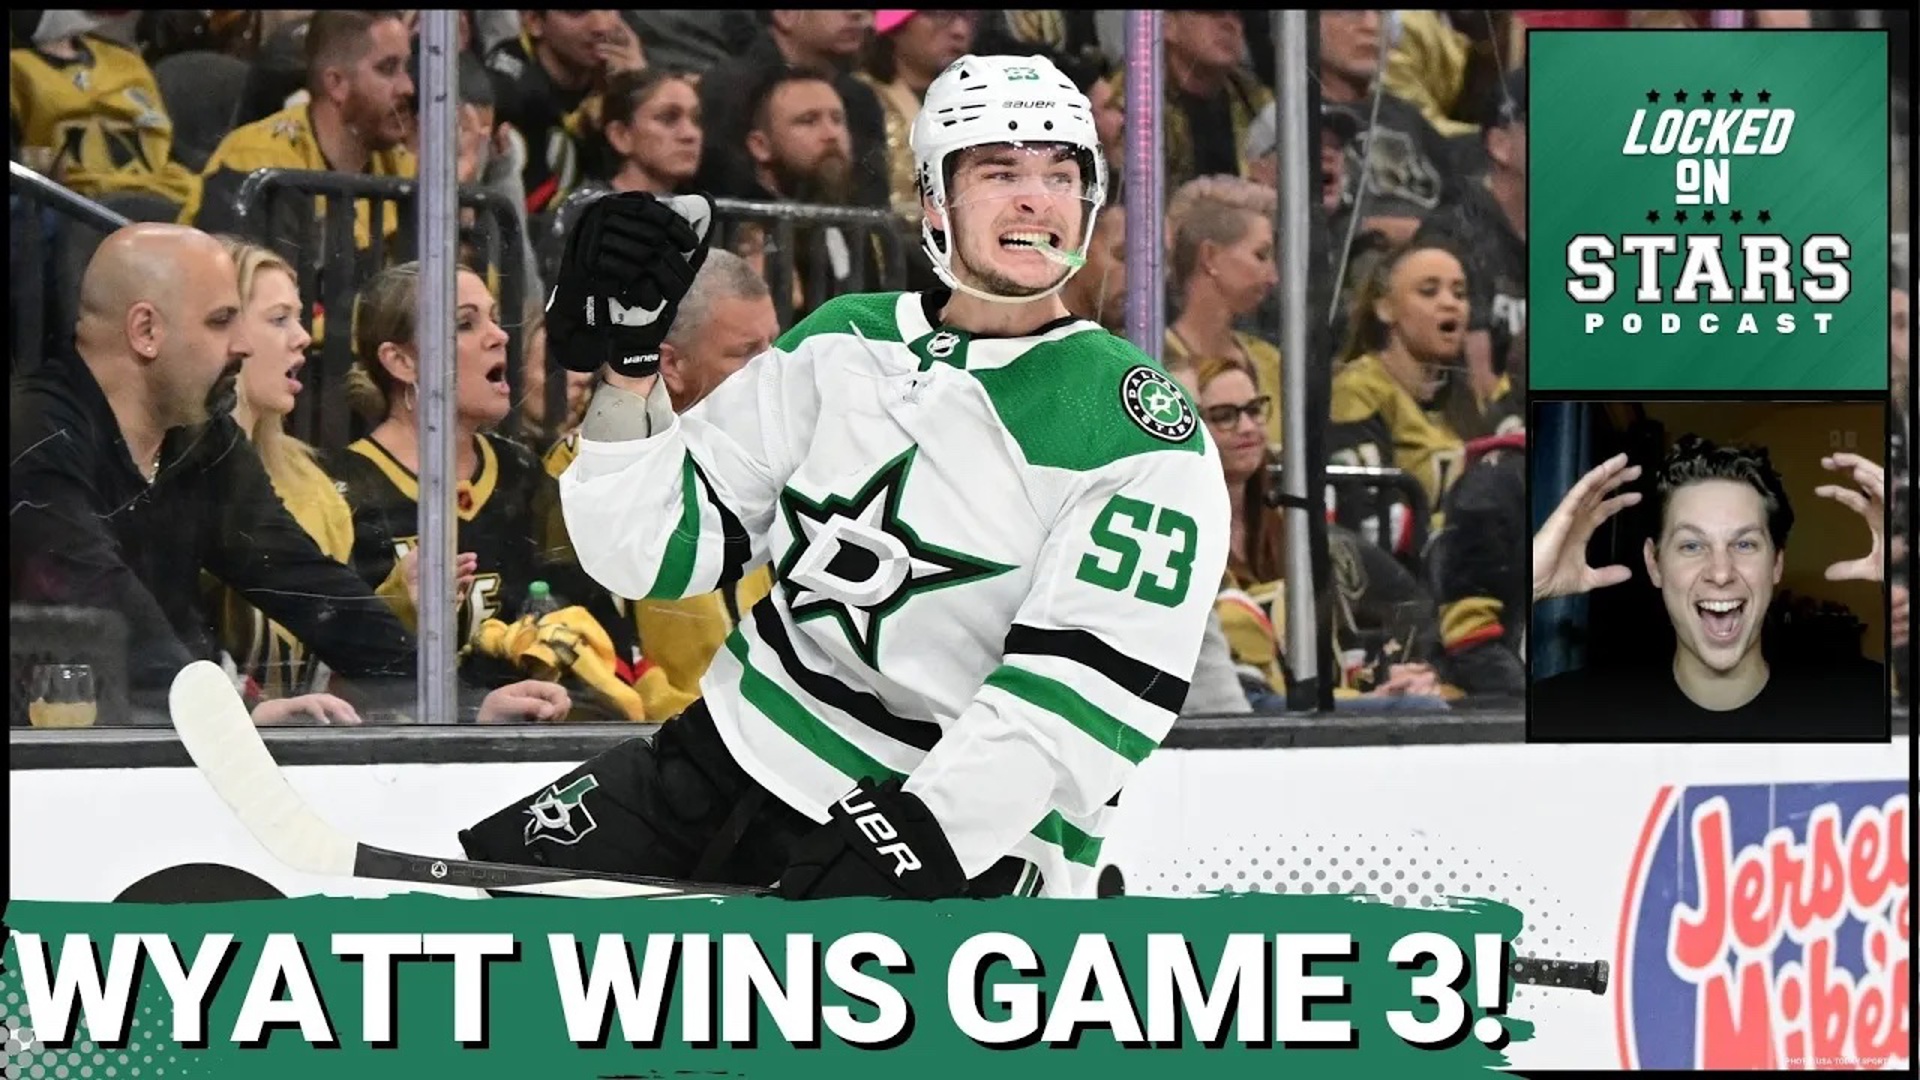 The Dallas Stars take down the Vegas Golden Knight in an overtime thriller by a final score of 3-2. Joey reacts to Wyatt Johnston's overtime winner.